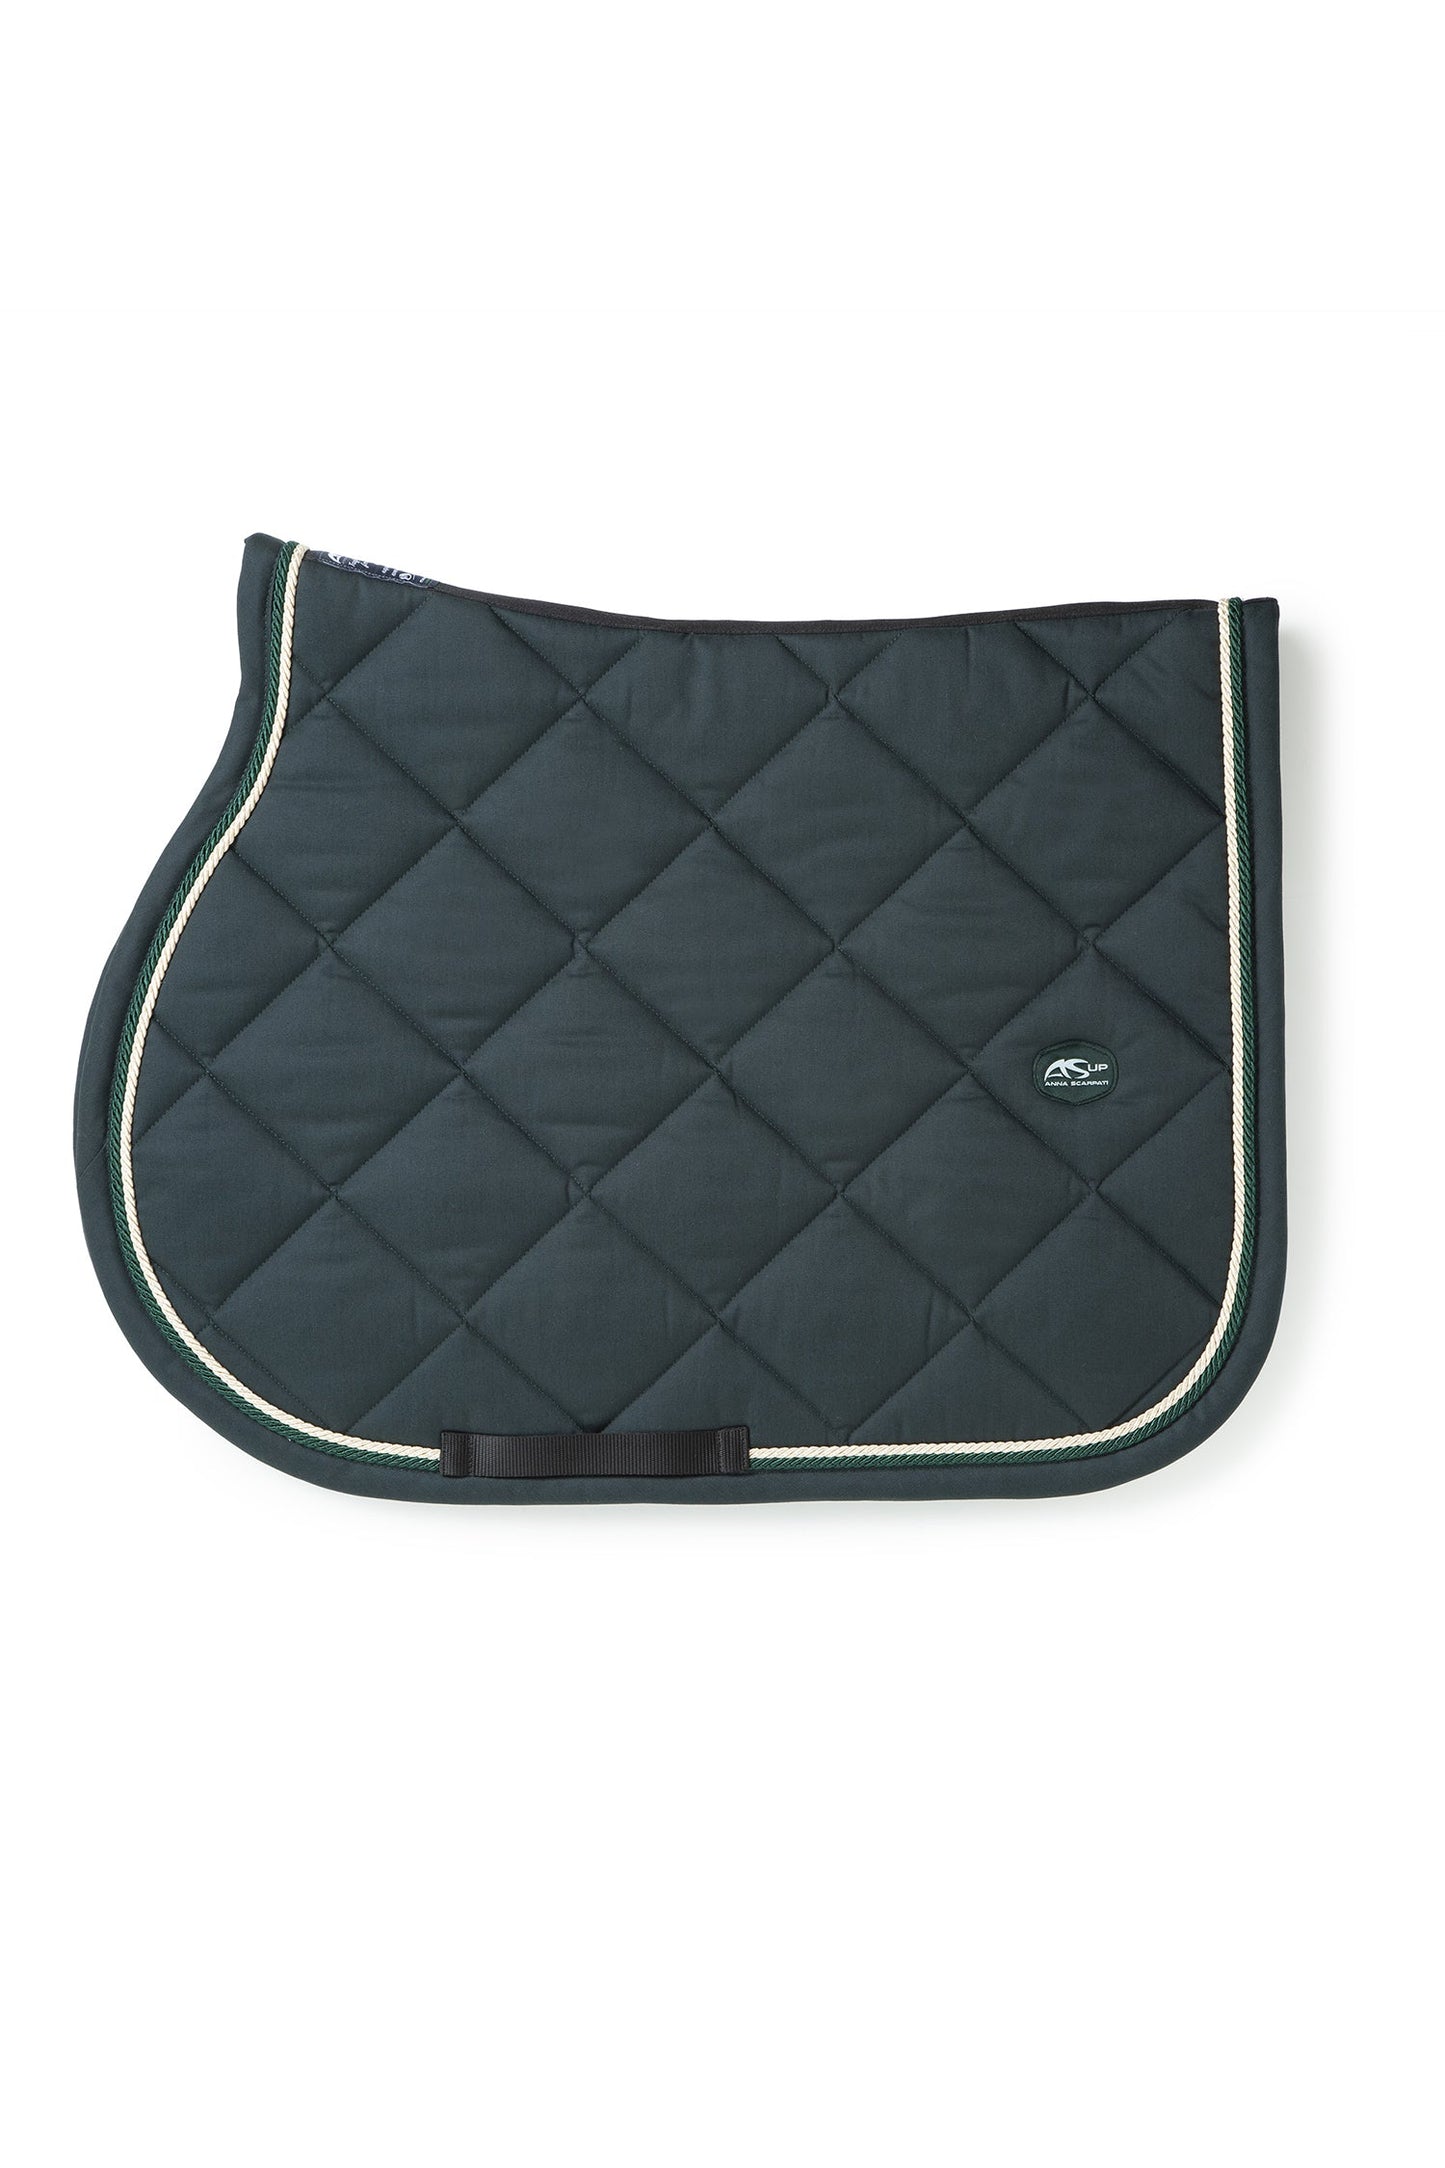 Anna Scarpati quilted horse saddle pad in dark green with trim.